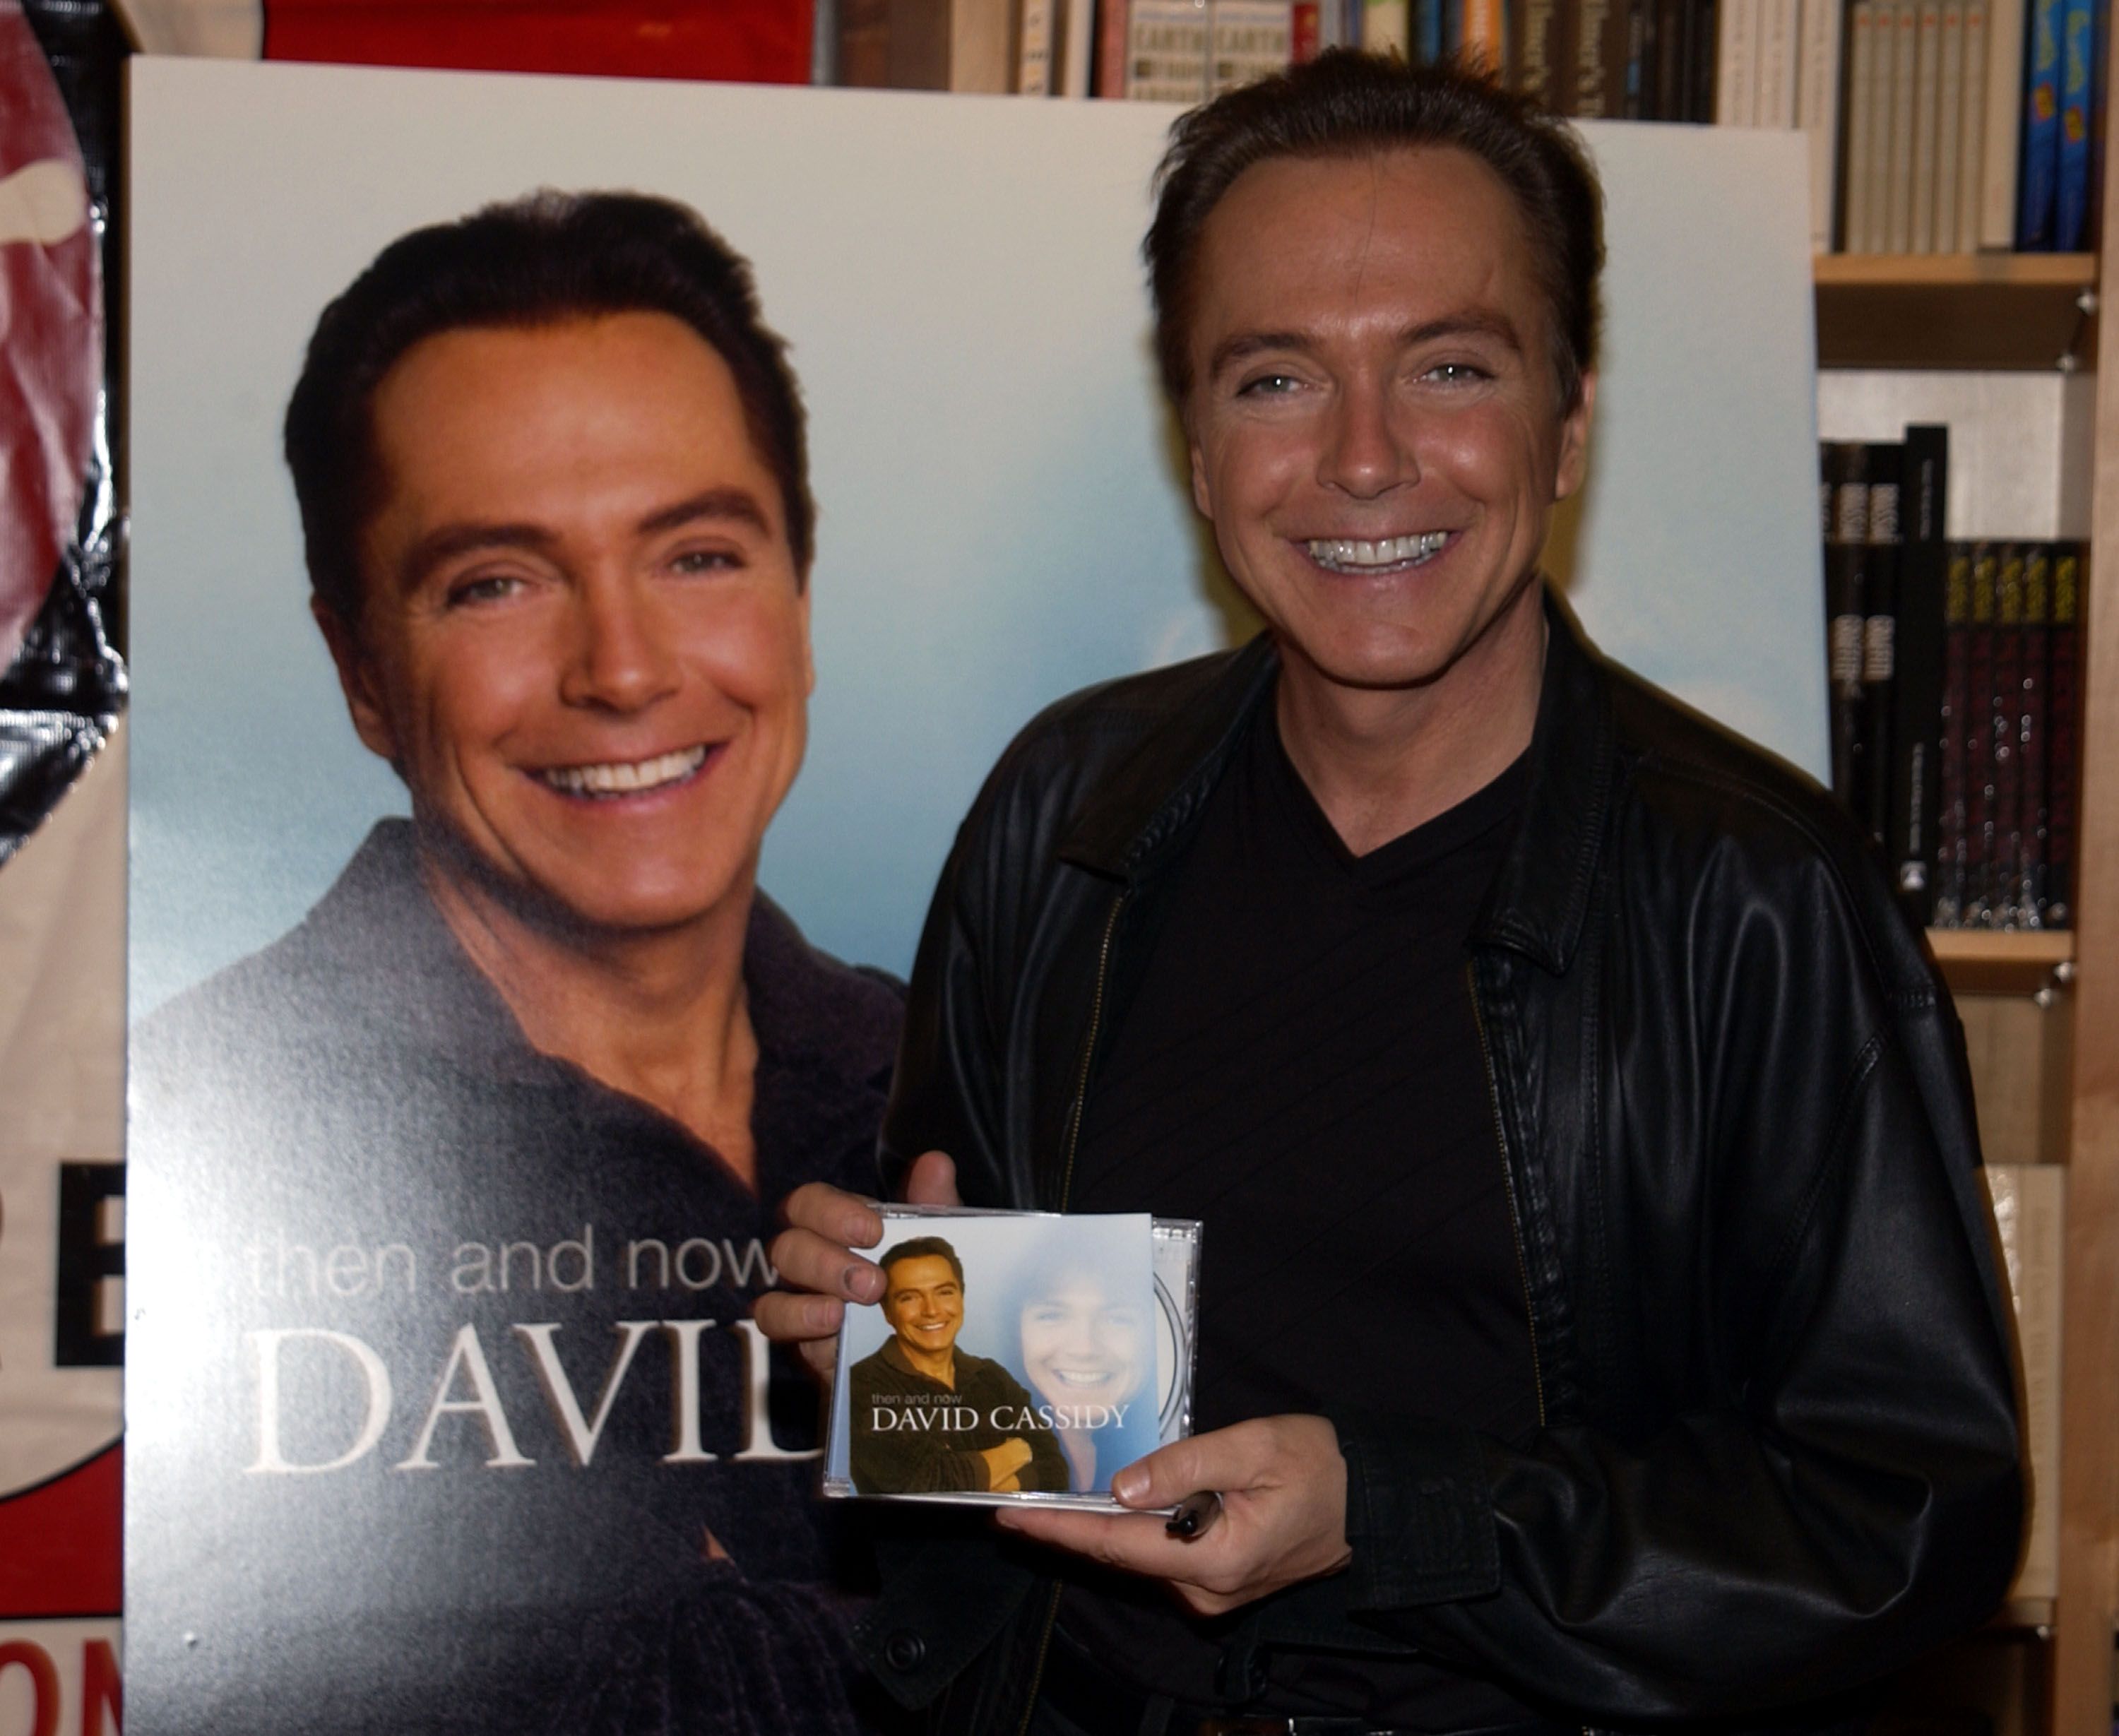 David Cassidy signs copies of his latest CD, "Then And Now" during an in-store appearance on May 15, 2002. | Source: Albert L. Ortega/WireImage/Getty Images